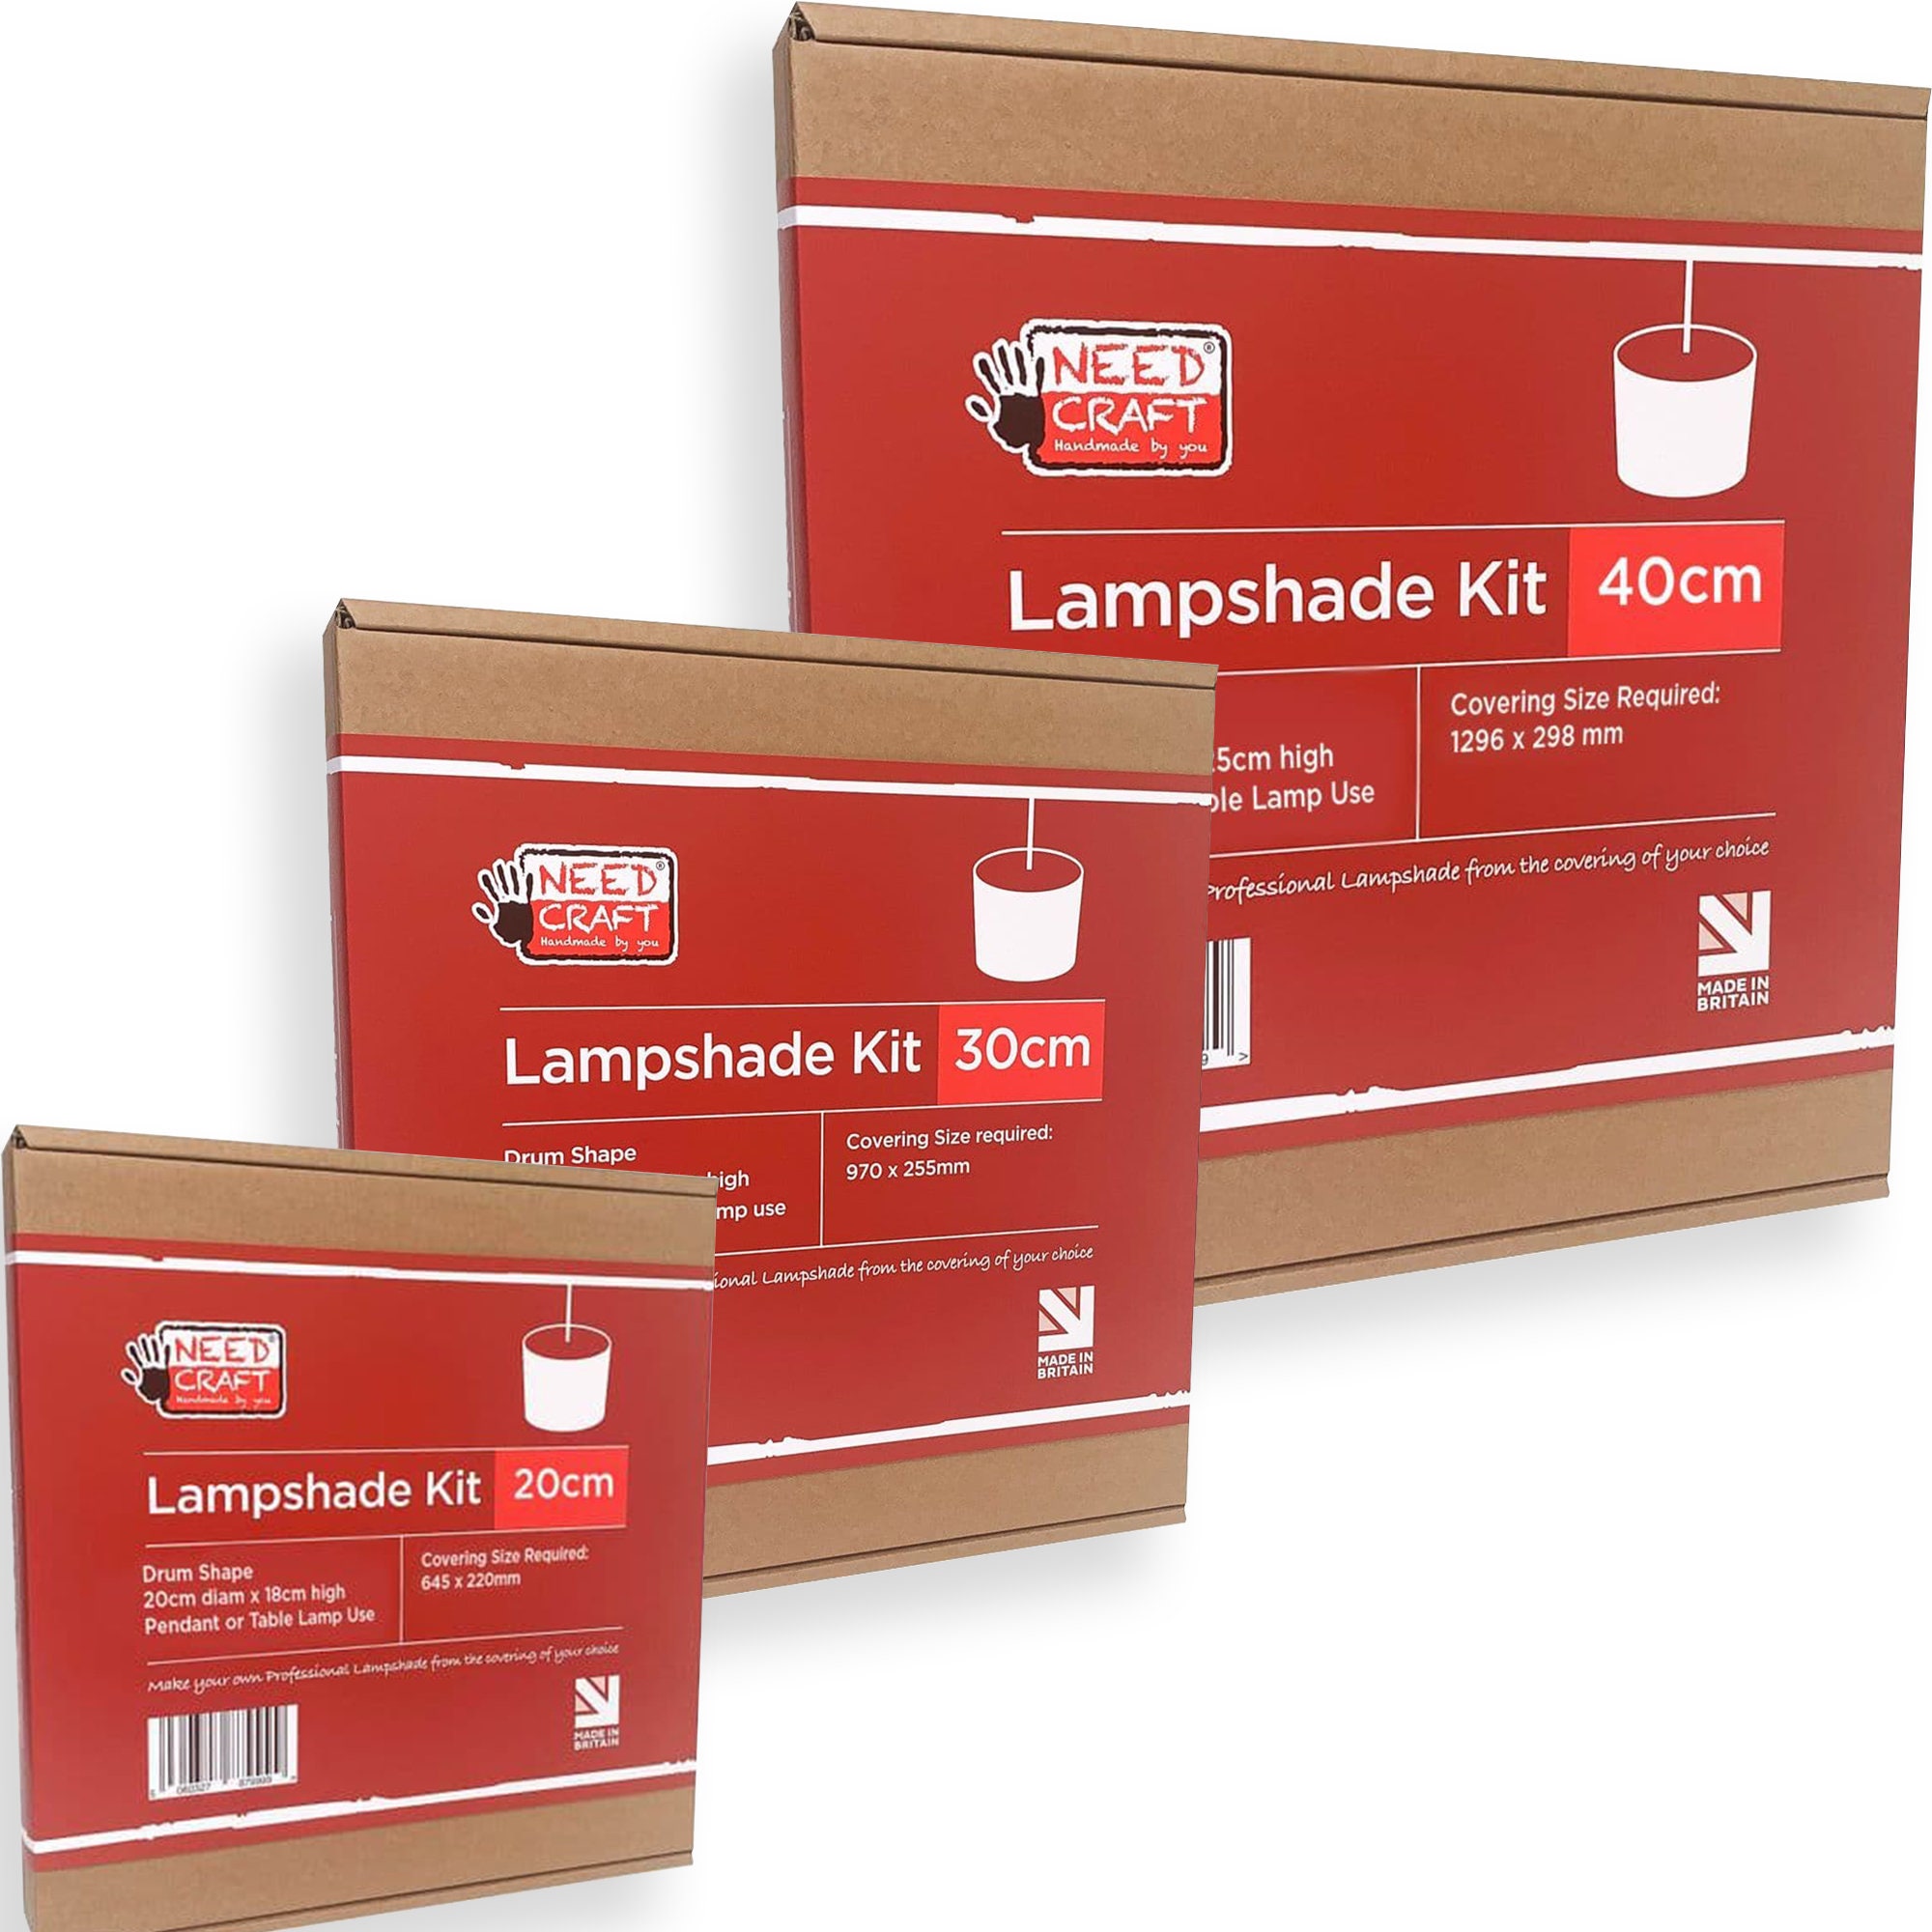 Lamp Kit Replacement Make-a-lamp Kit With All Parts & Instructions for DIY  Lamp or Repair H-77-I1 